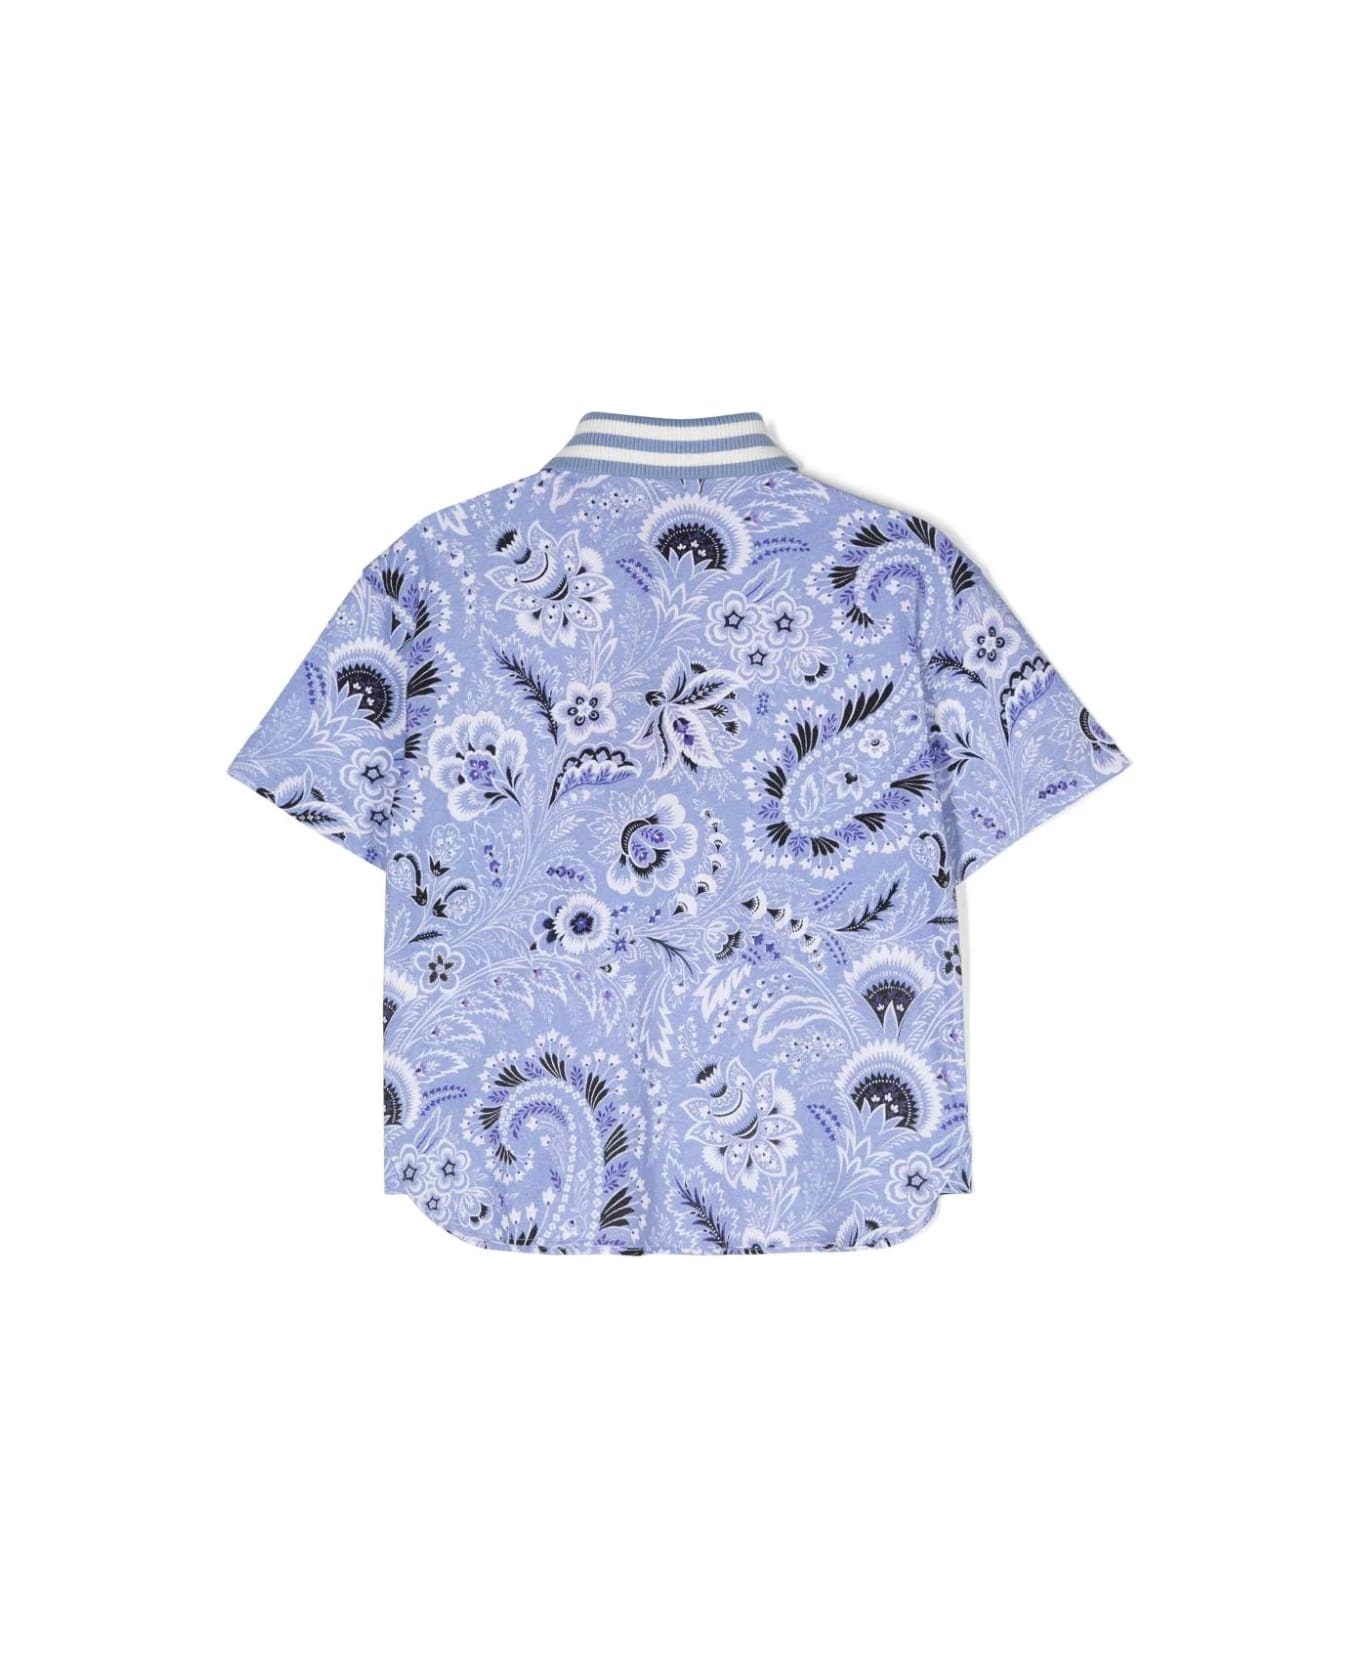 Etro Light Blue Polo Shirt With Paisley Print - Blue Tシャツ＆ポロシャツ